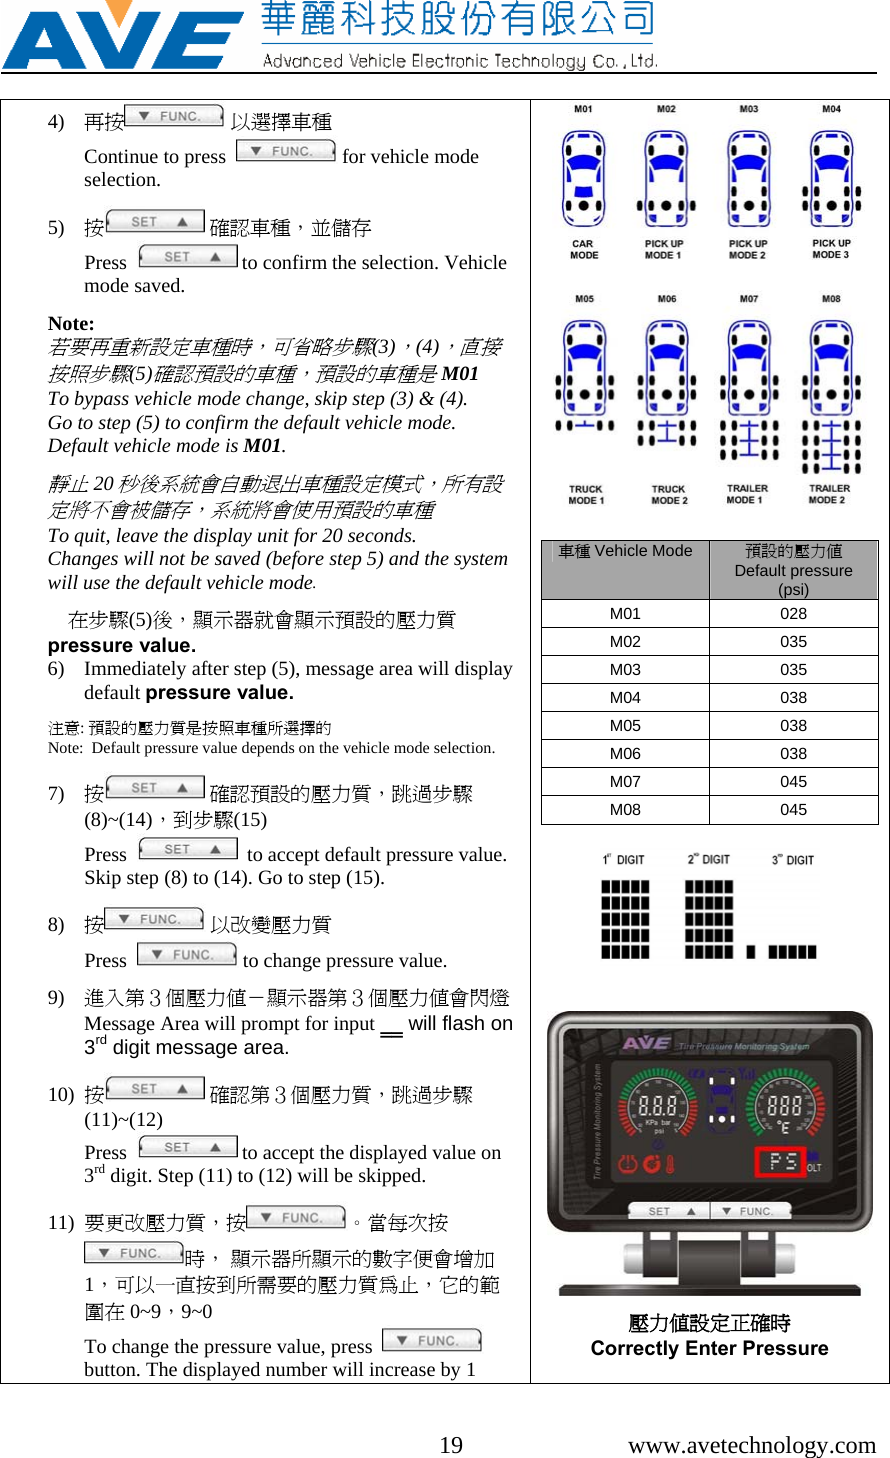     19 www.avetechnology.com 4) 再按  以選擇車種        Continue to press    for vehicle mode selection.  5) 按 確認車種，並儲存            Press    to confirm the selection. Vehicle mode saved.  Note: 若要再重新設定車種時，可省略步驟(3)，(4)，直接按照步驟(5)確認預設的車種，預設的車種是M01 To bypass vehicle mode change, skip step (3) &amp; (4).  Go to step (5) to confirm the default vehicle mode.  Default vehicle mode is M01.  靜止20秒後系統會自動退出車種設定模式，所有設定將不會被儲存，系統將會使用預設的車種 To quit, leave the display unit for 20 seconds.  Changes will not be saved (before step 5) and the system will use the default vehicle mode.  在步驟(5)後，顯示器就會顯示預設的壓力質pressure value. 6) Immediately after step (5), message area will display default pressure value.  注意: 預設的壓力質是按照車種所選擇的                                      Note:  Default pressure value depends on the vehicle mode selection.  7) 按 確認預設的壓力質，跳過步驟(8)~(14)，到步驟(15)                                                    Press     to accept default pressure value. Skip step (8) to (14). Go to step (15).  8) 按 以改變壓力質                                        Press    to change pressure value.  9) 進入第３個壓力值－顯示器第３個壓力值會閃燈Message Area will prompt for input ‗‗ will flash on 3rd digit message area.  10) 按 確認第３個壓力質，跳過步驟(11)~(12)                                                              Press    to accept the displayed value on 3rd digit. Step (11) to (12) will be skipped.  11) 要更改壓力質，按 。當每次按時， 顯示器所顯示的數字便會增加1，可以一直按到所需要的壓力質為止，它的範圍在 0~9，9~0                              To change the pressure value, press    button. The displayed number will increase by 1    車種 Vehicle Mode 預設的壓力值   Default pressure (psi) M01 028 M02 035 M03 035 M04 038 M05 038 M06 038 M07 045 M08 045      壓力值設定正確時 Correctly Enter Pressure  